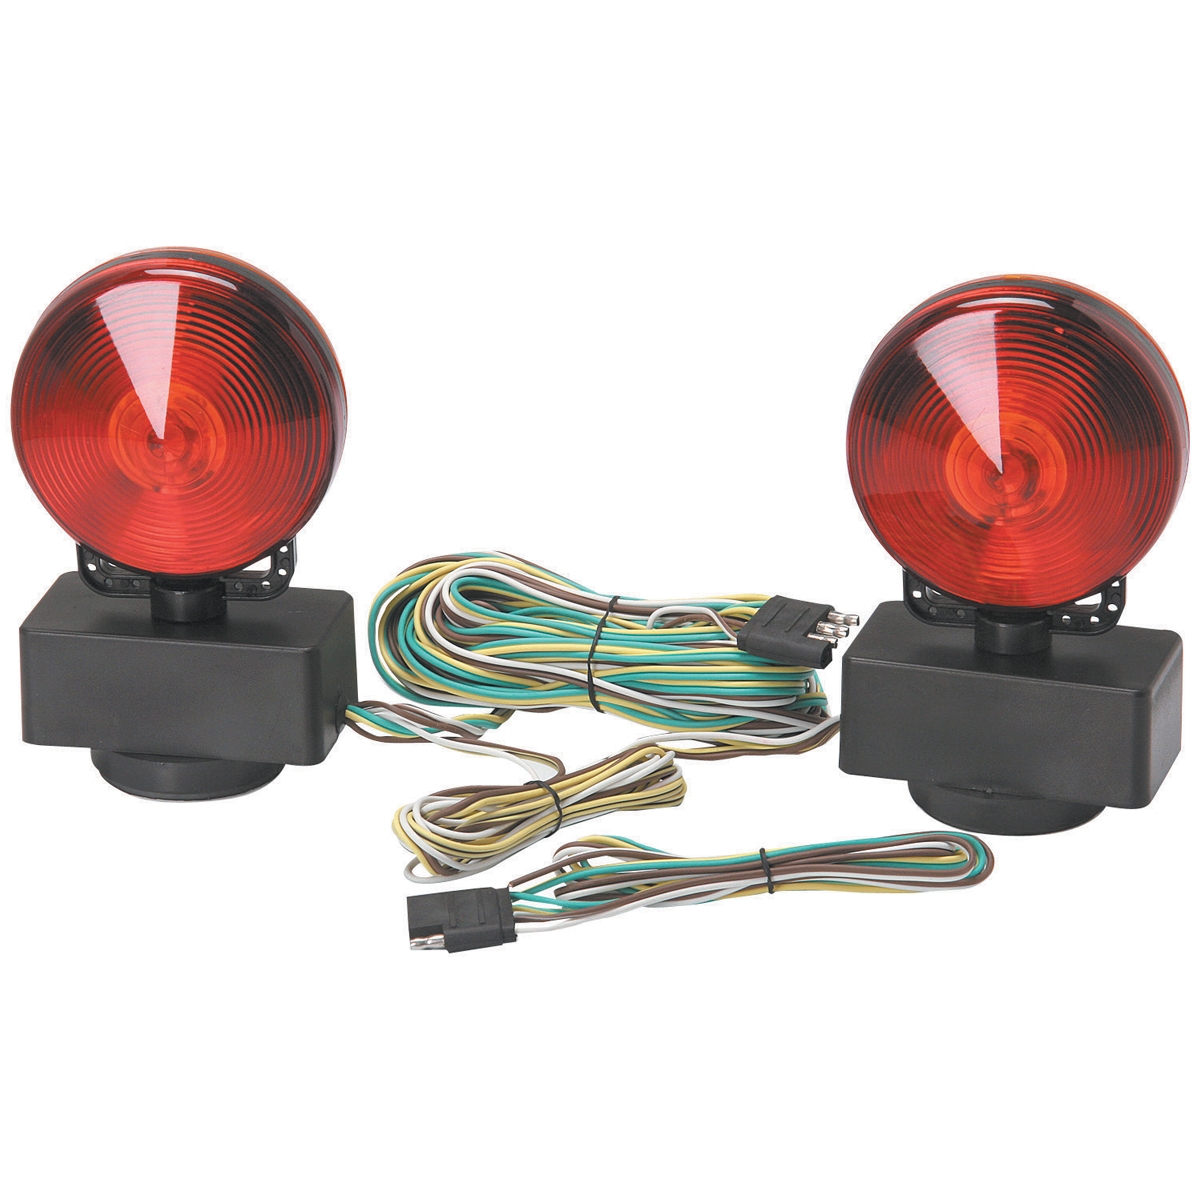 Magnetic towing Lights 12 Volt Magnetic towing Light Kit